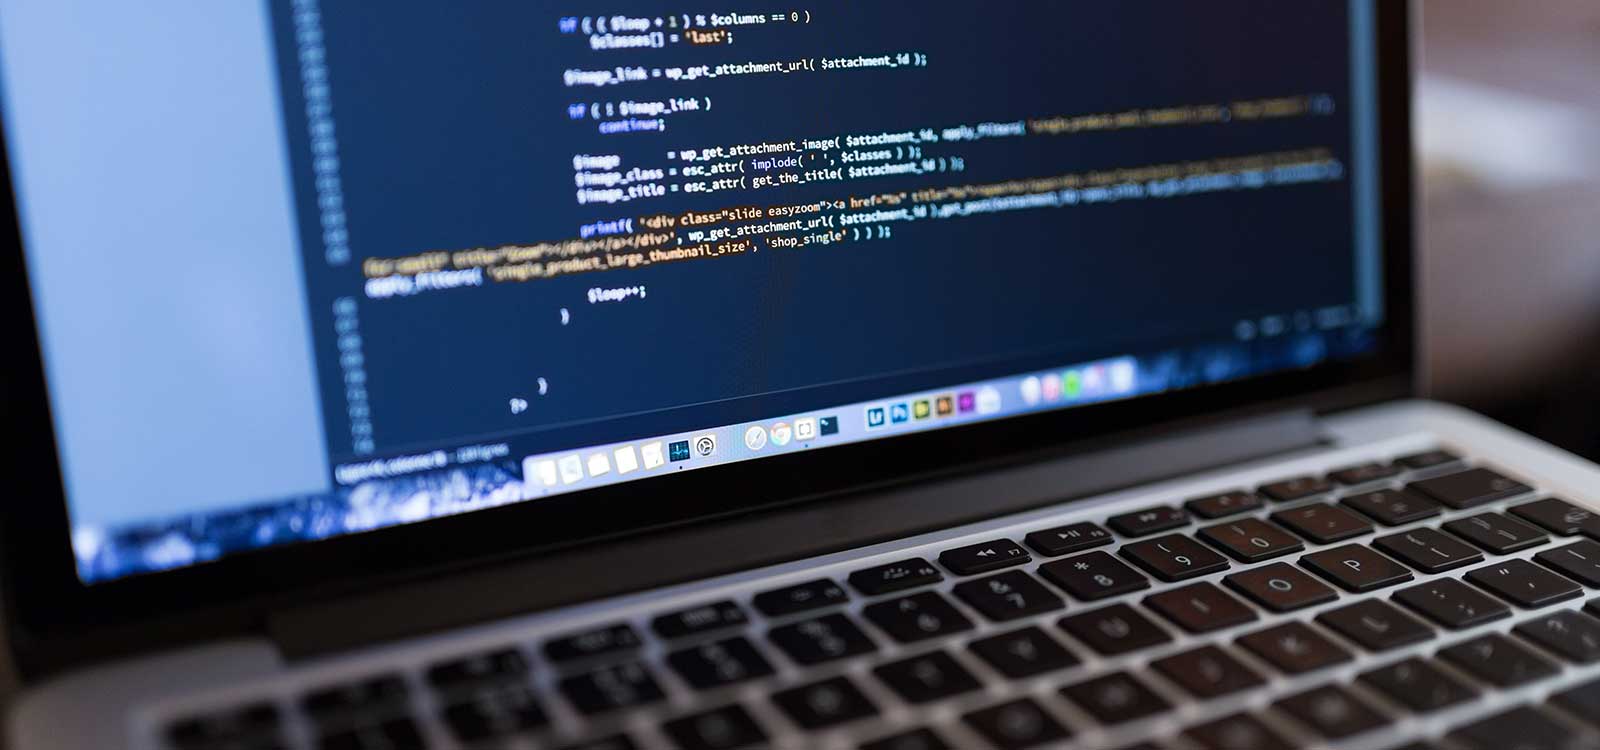 <div class='slider_caption'>
                                                     <h1>Coding</h1>
                                                     <a class='slider-readmore' href='/courses/#coding'>
                                                     Learn programming languages by working on interesting and engaging projects...                                                     </a>
                                                     </div>